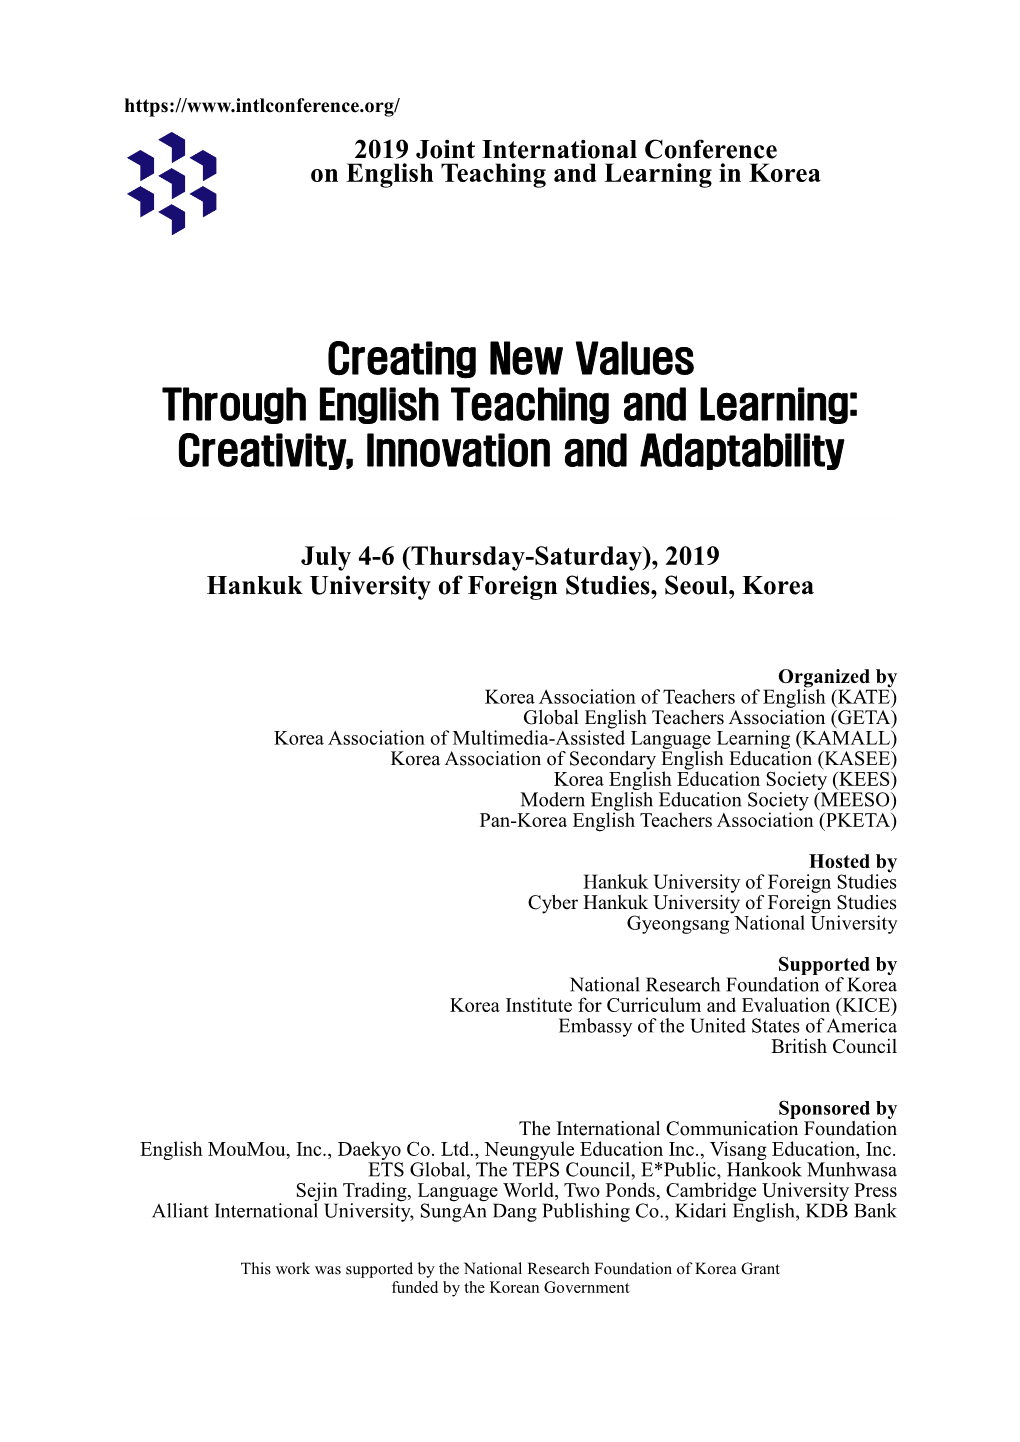 Creating New Values Through English Teaching and Learning: Creativity, Innovation and Adaptability